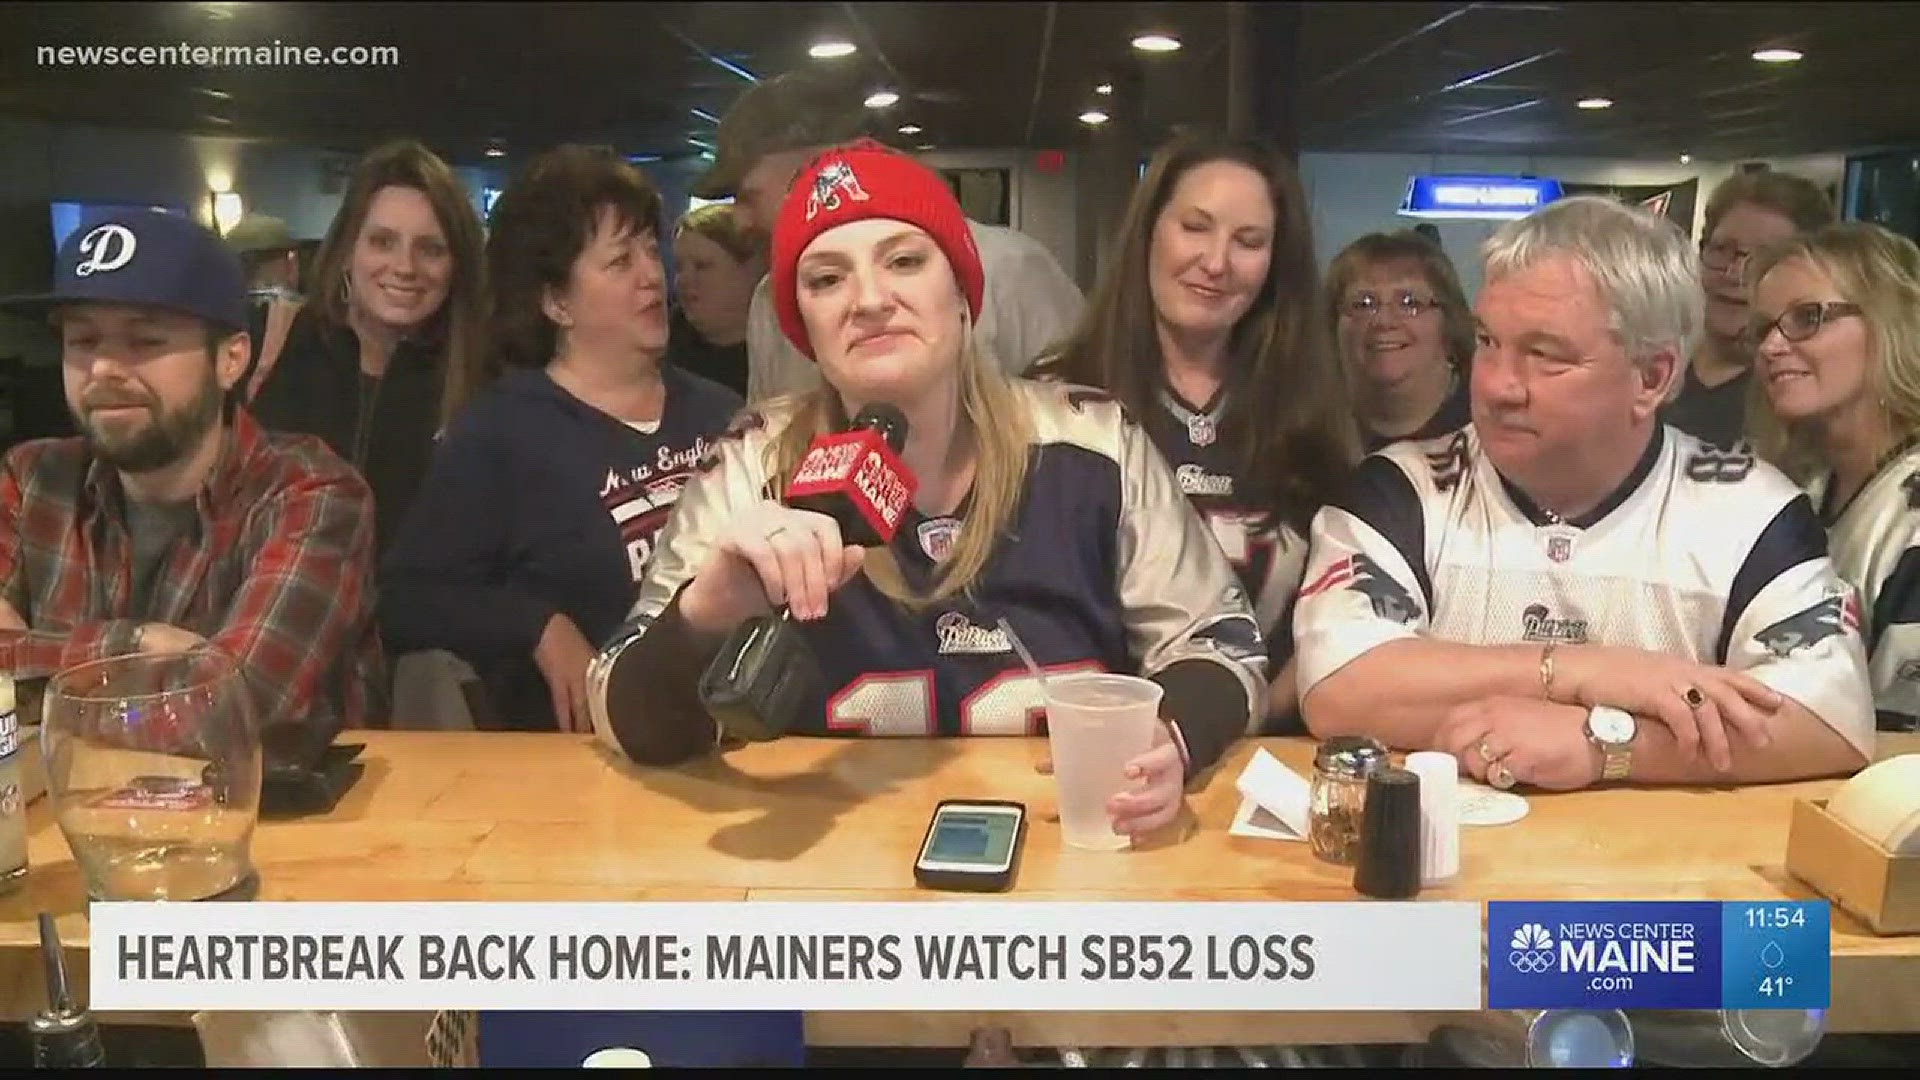 From Wells to Calais, in sports bars and living rooms, the settings were different at Super Bowl watch parties across Maine, but the emotions felt by Patriots fans were much the same